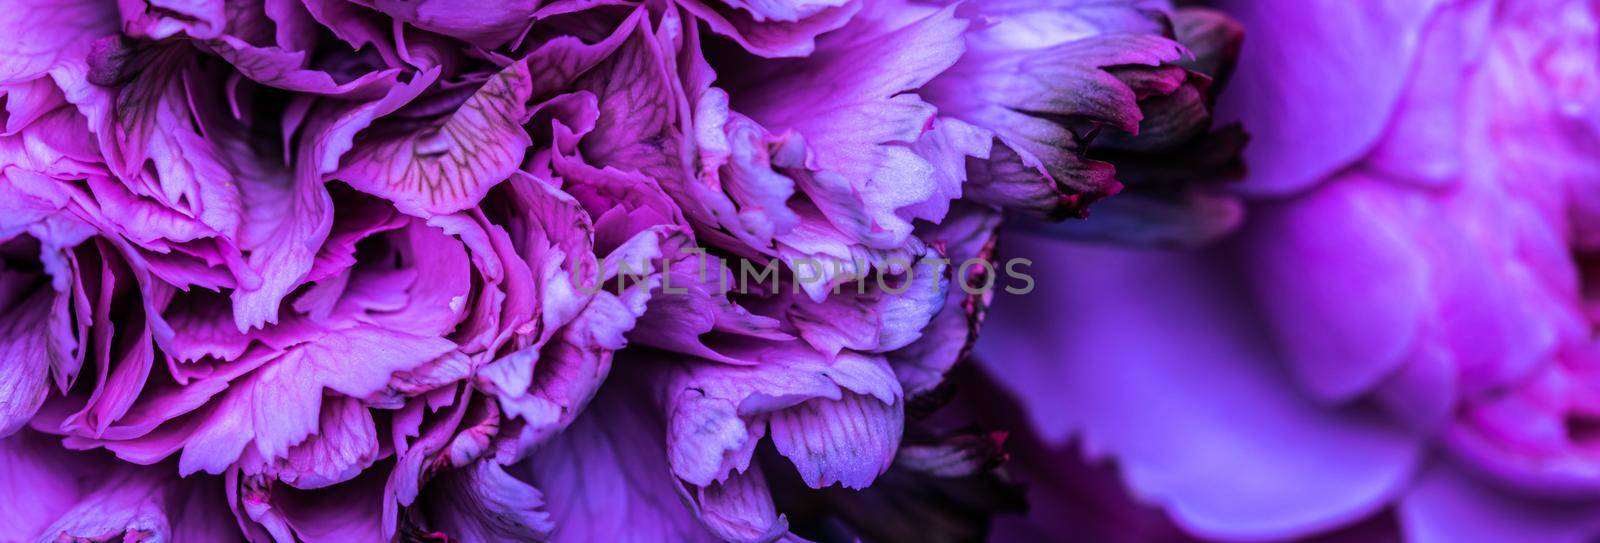 Abstract floral background, blue carnation flower petals. Macro flowers backdrop for holiday brand design.